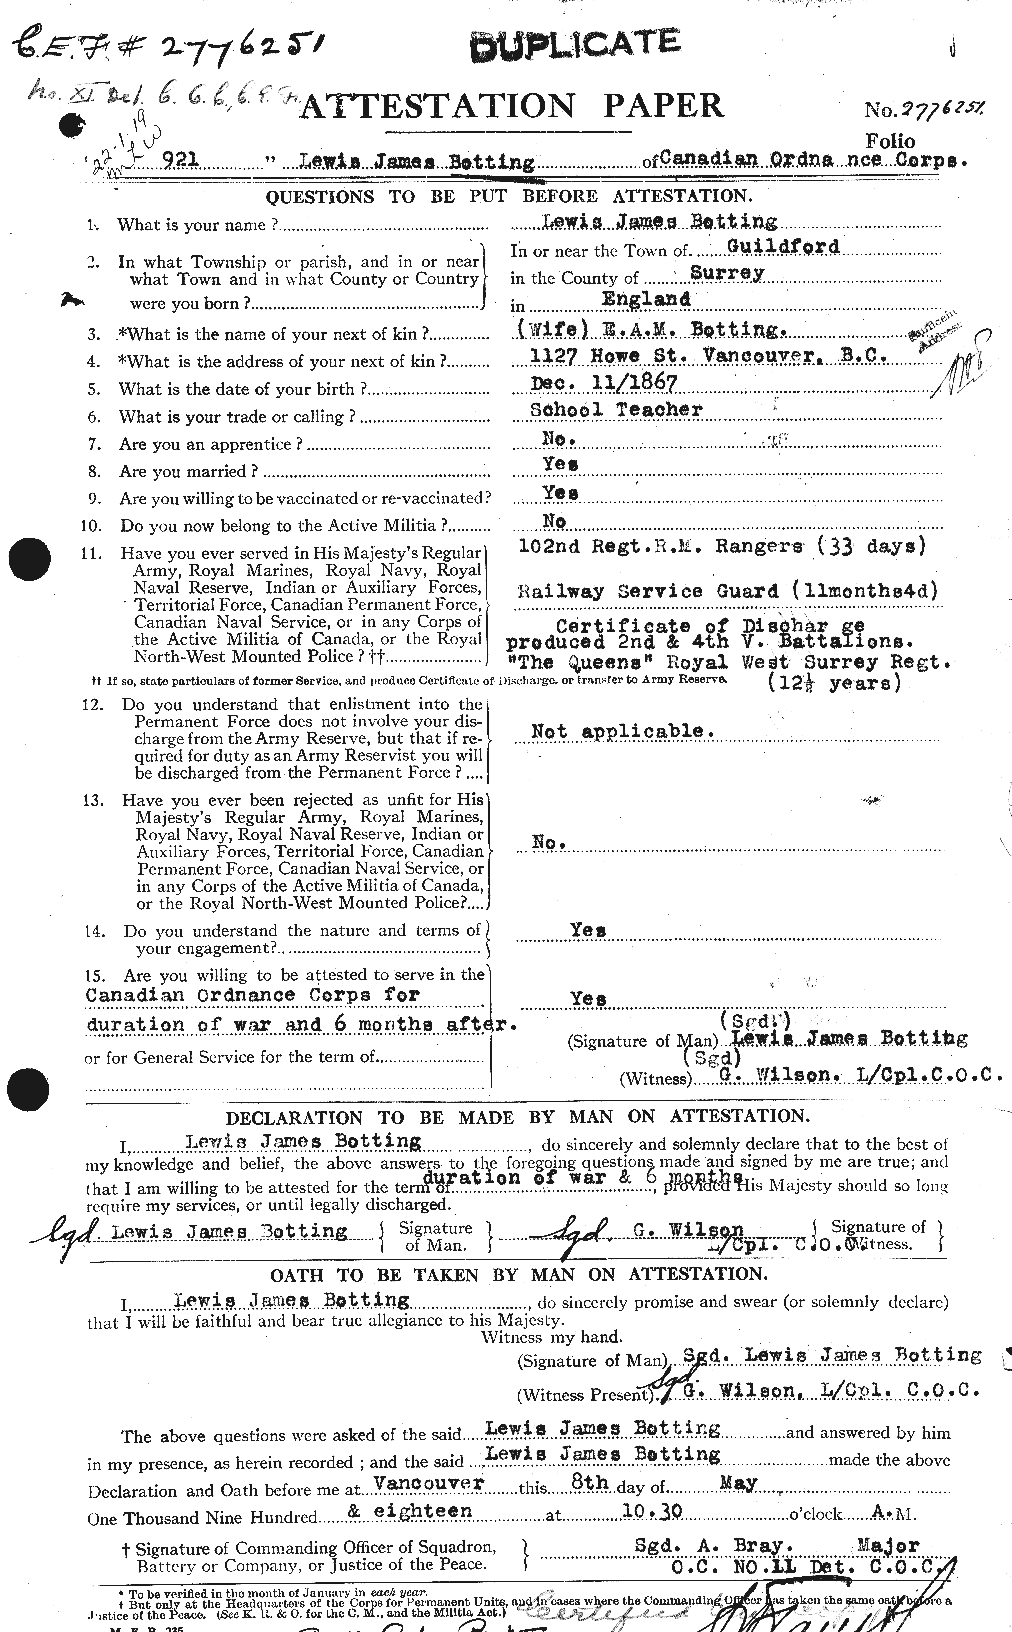 Personnel Records of the First World War - CEF 252099a